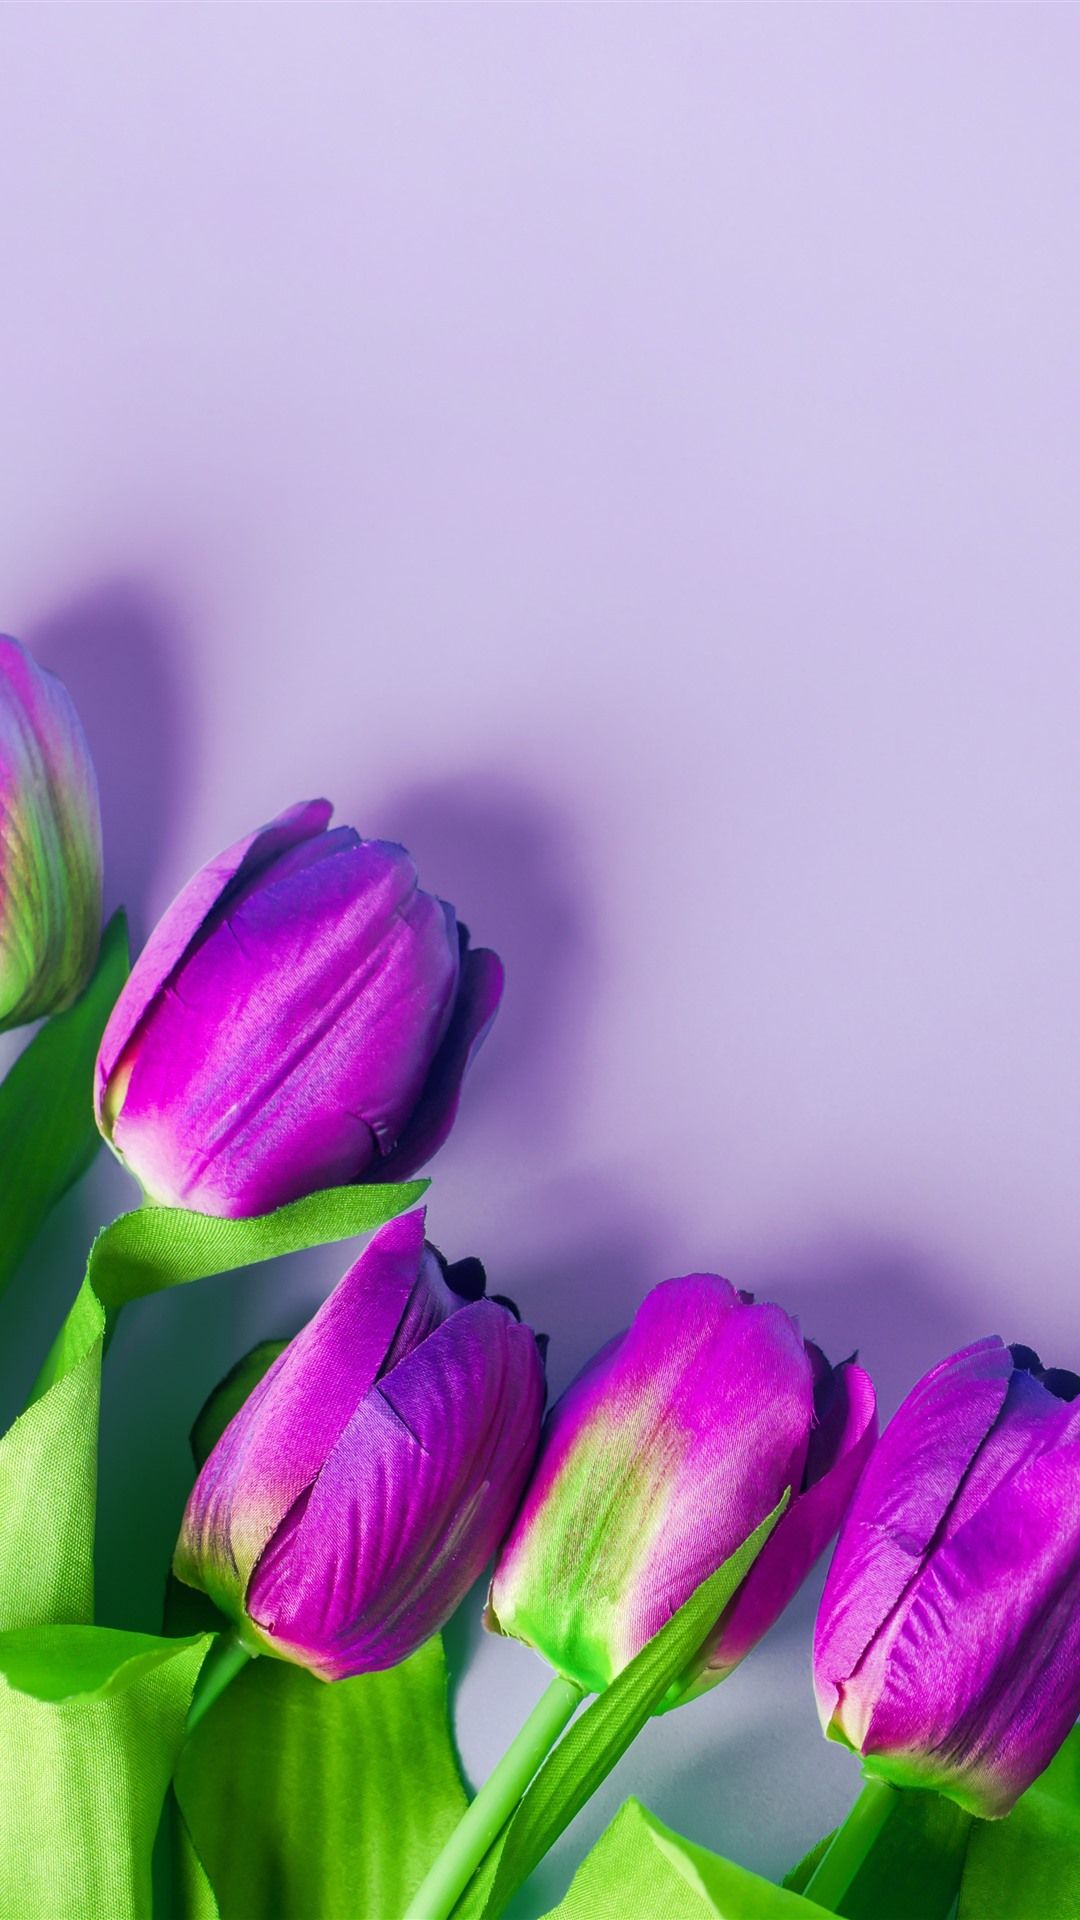 Wallpaper Purple tulips, flowers, light pink background 5120x2880 UHD 5K Picture, Image